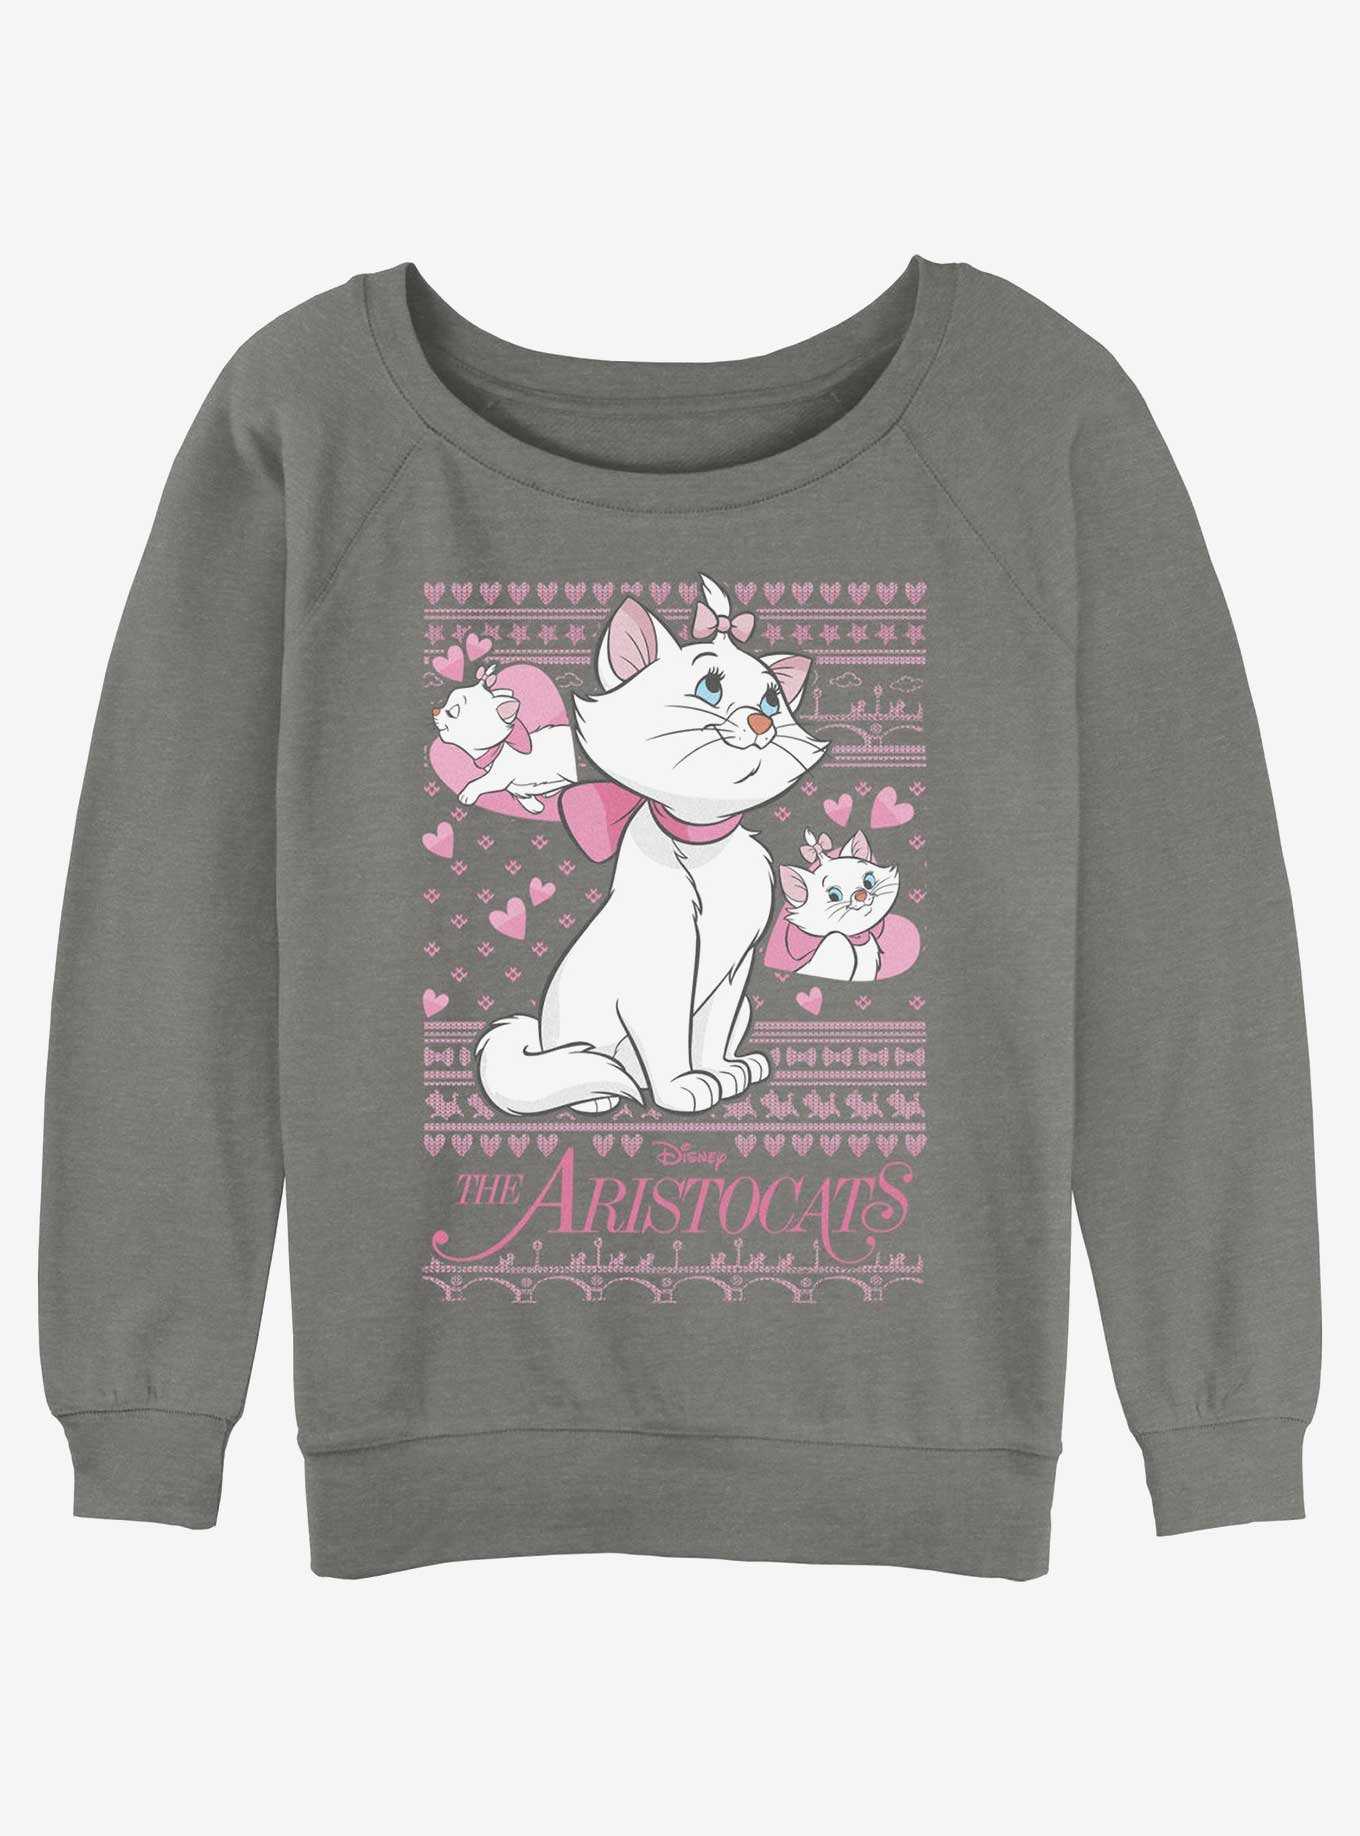 OFFICIAL Aristocats Plushies, Shirts & Merch